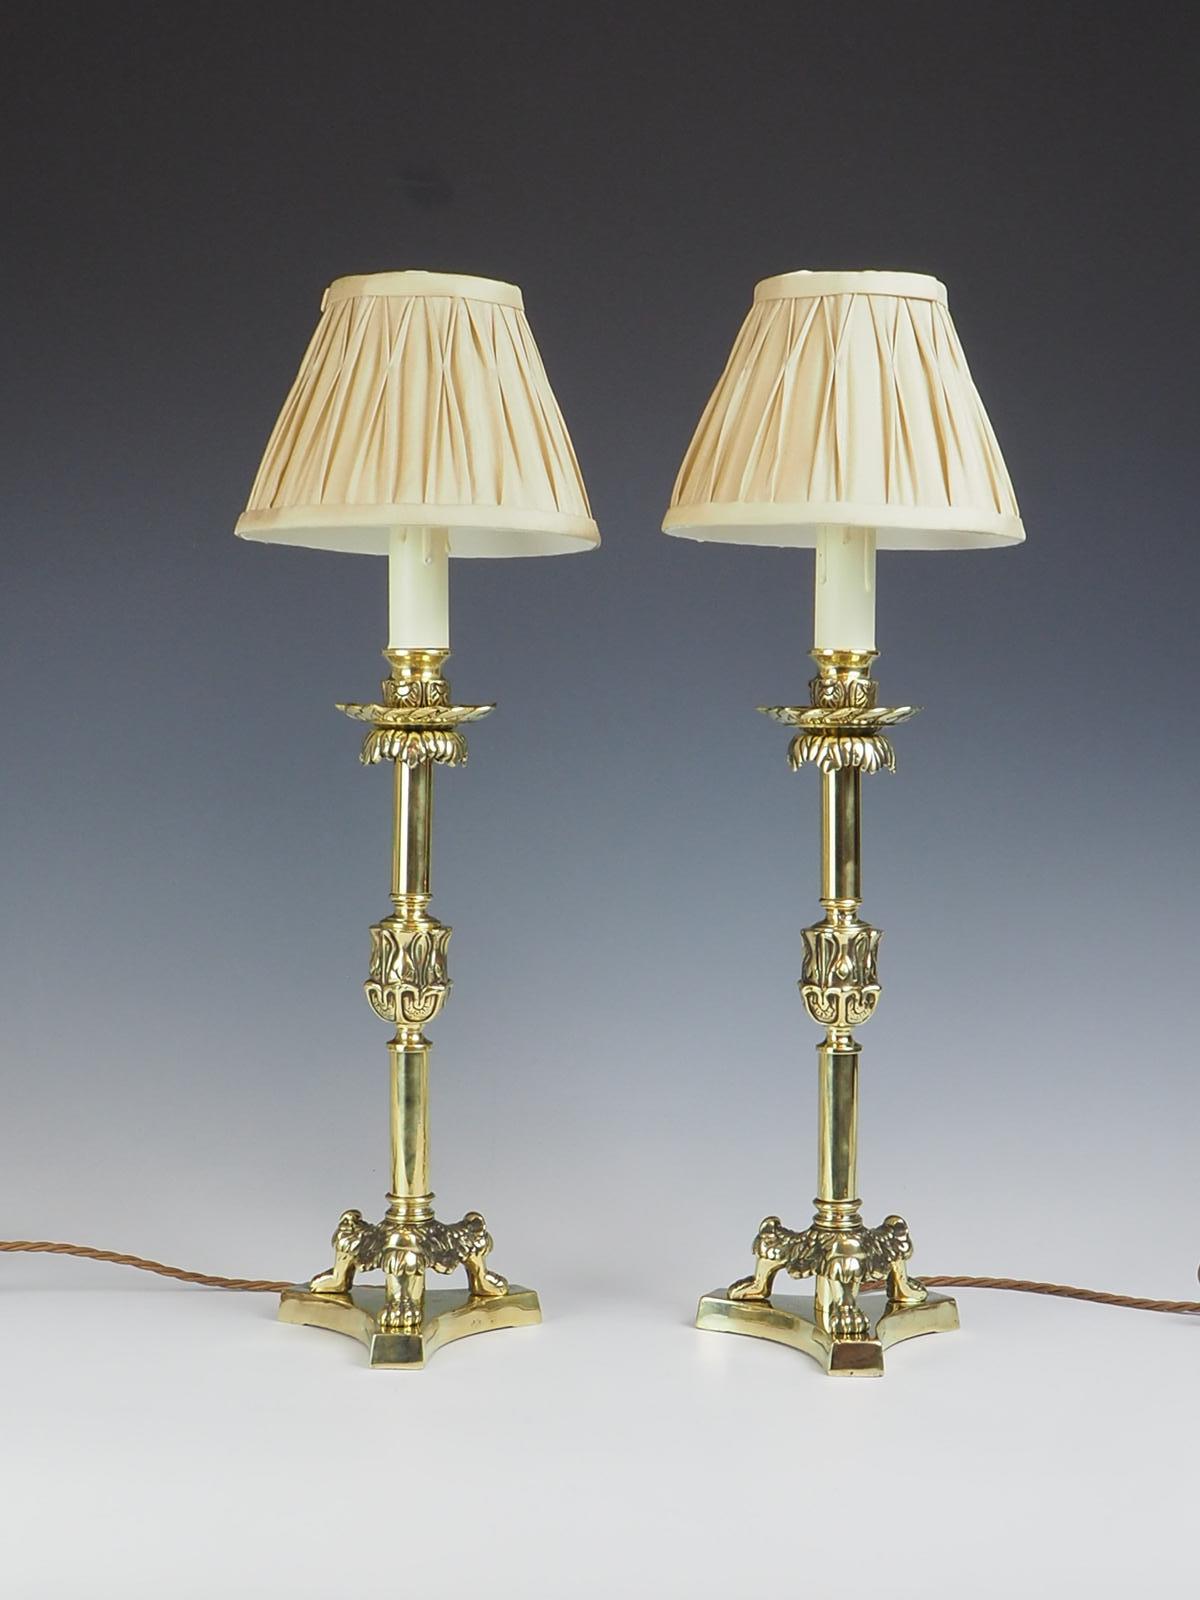 Exquisite pair of brass candlestick lamps from the 19th century showcases an elegant design that is sure to add a touch of sophistication to any space.

Standing on tri-form lion claws feet, these candlesticks not only provide a stable base but also